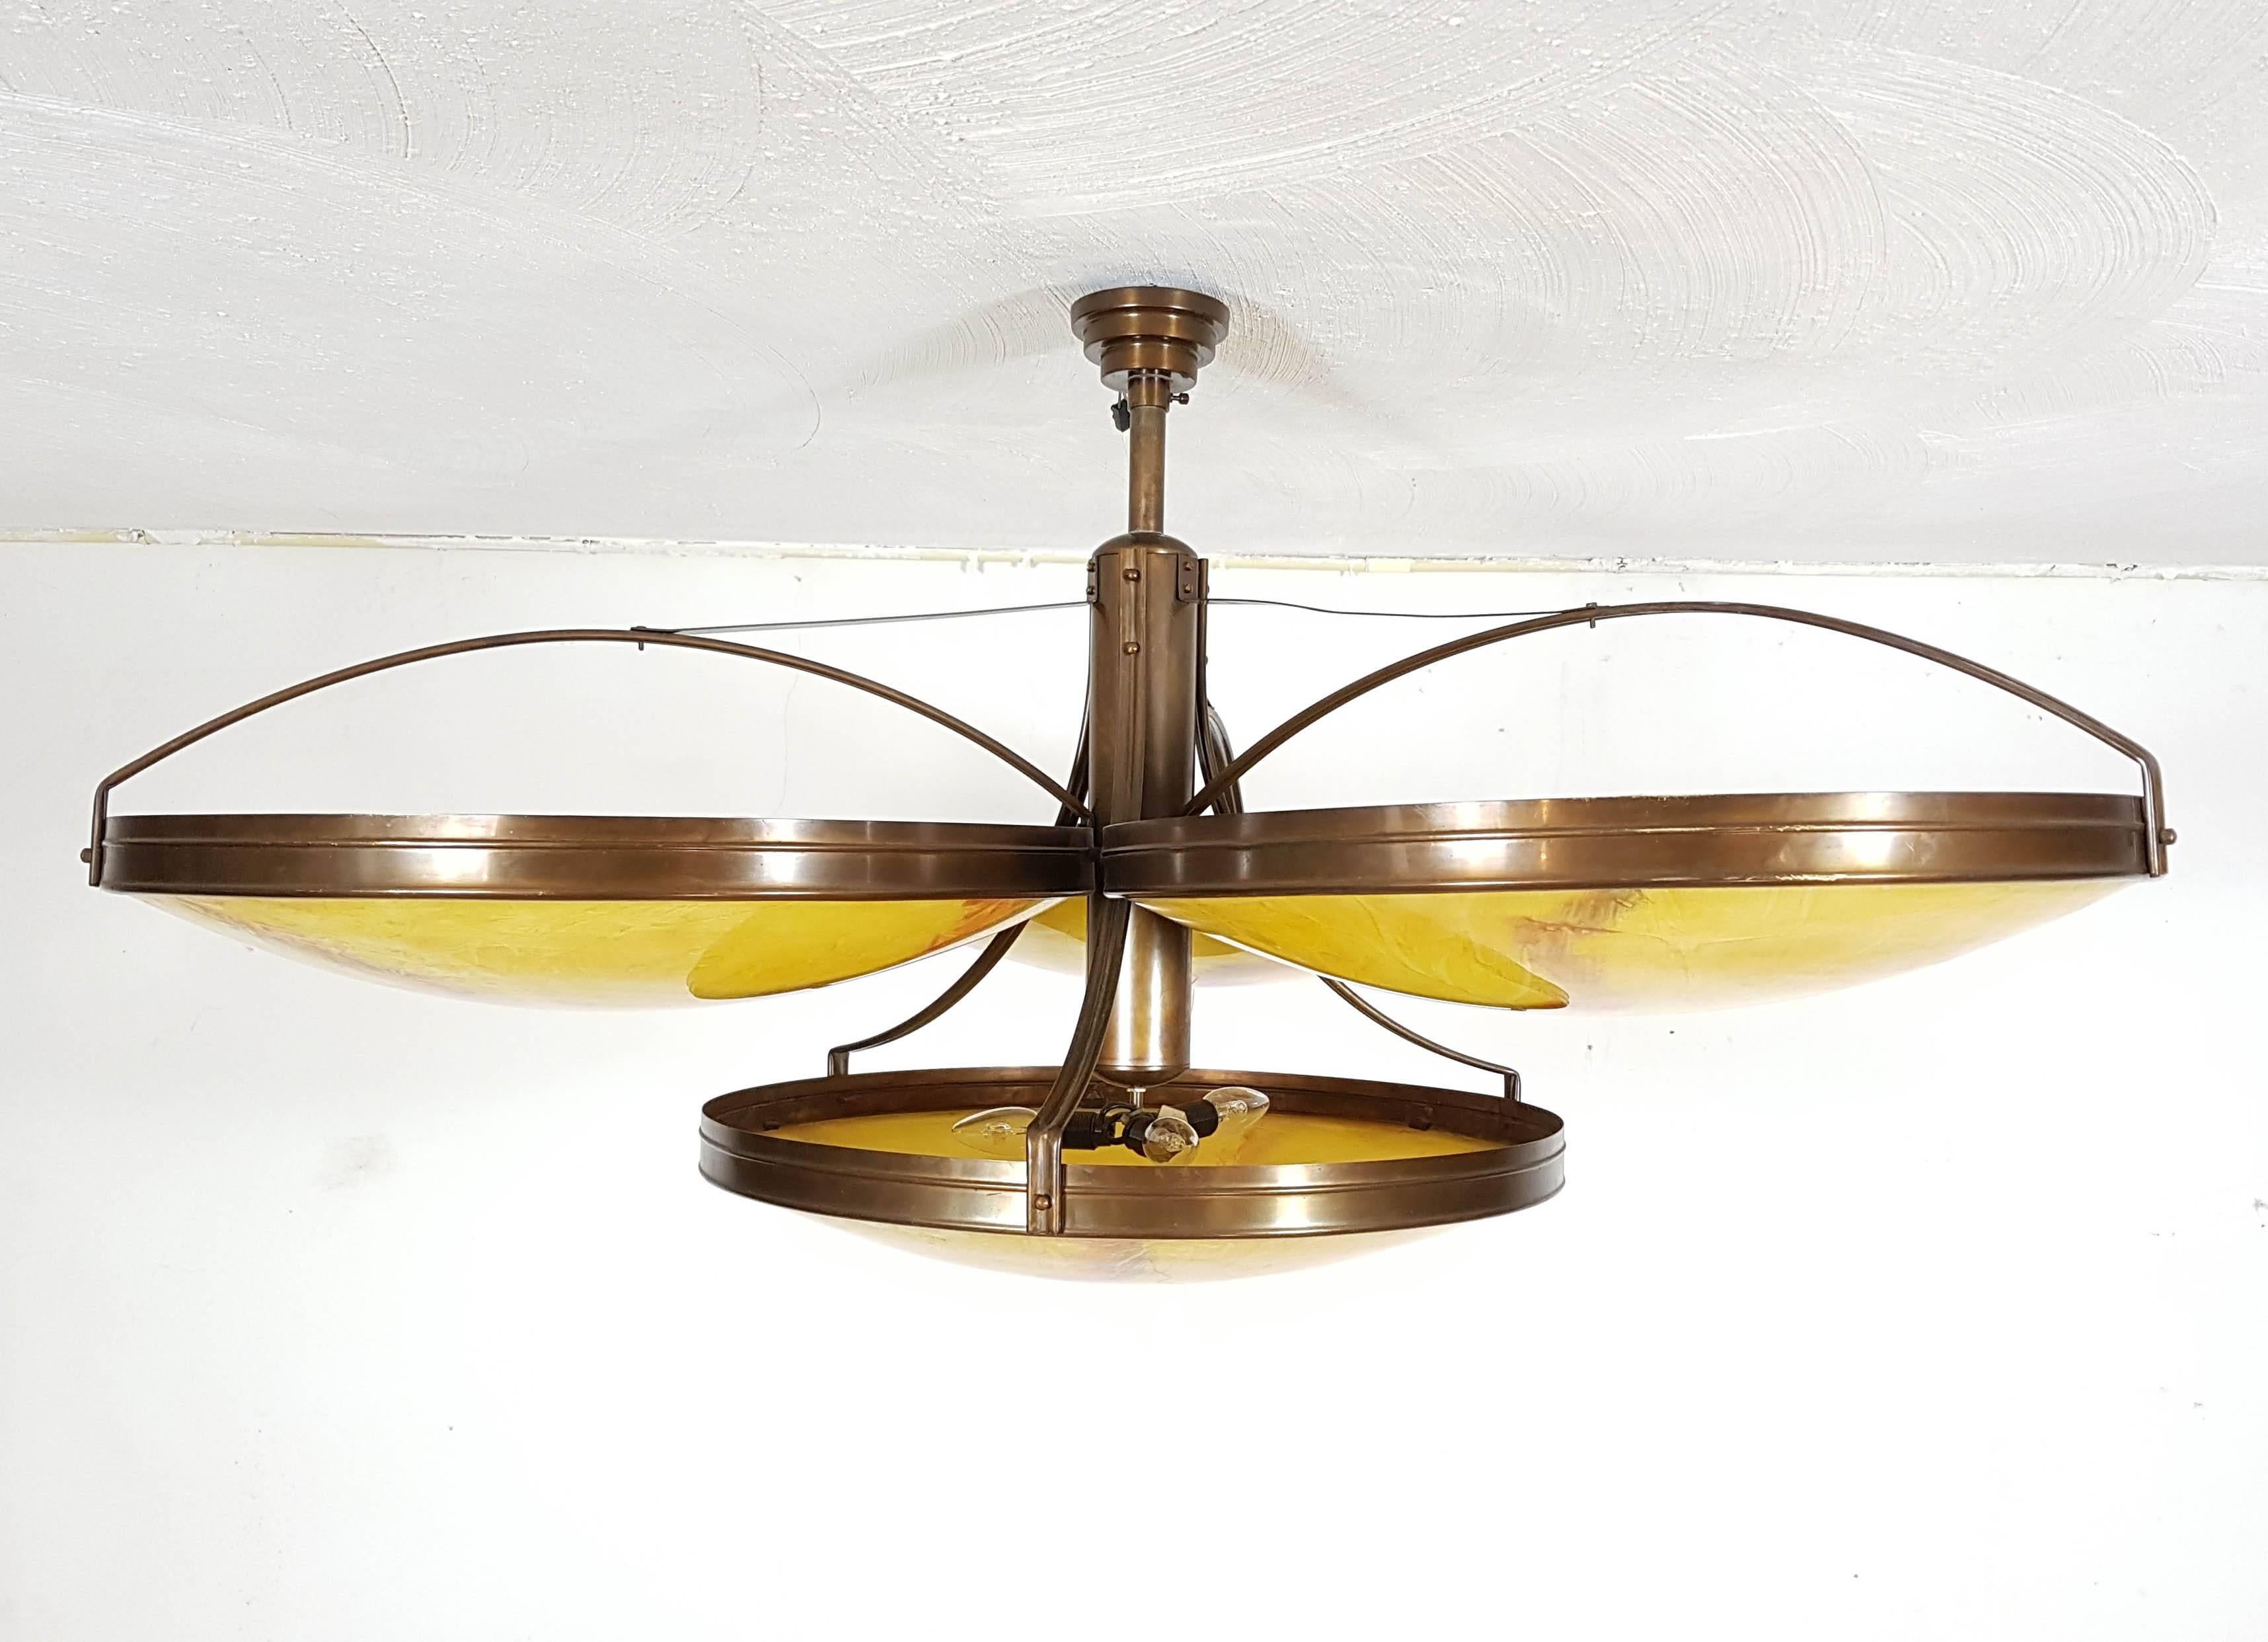 Four quality custom-made reproduction Art Deco pendant lamps consisting of four clustered bowls each. Brass finish and marbled glass bowls holding three armatures each. At a total diameter of 120cm these are very large and impressive lamps.